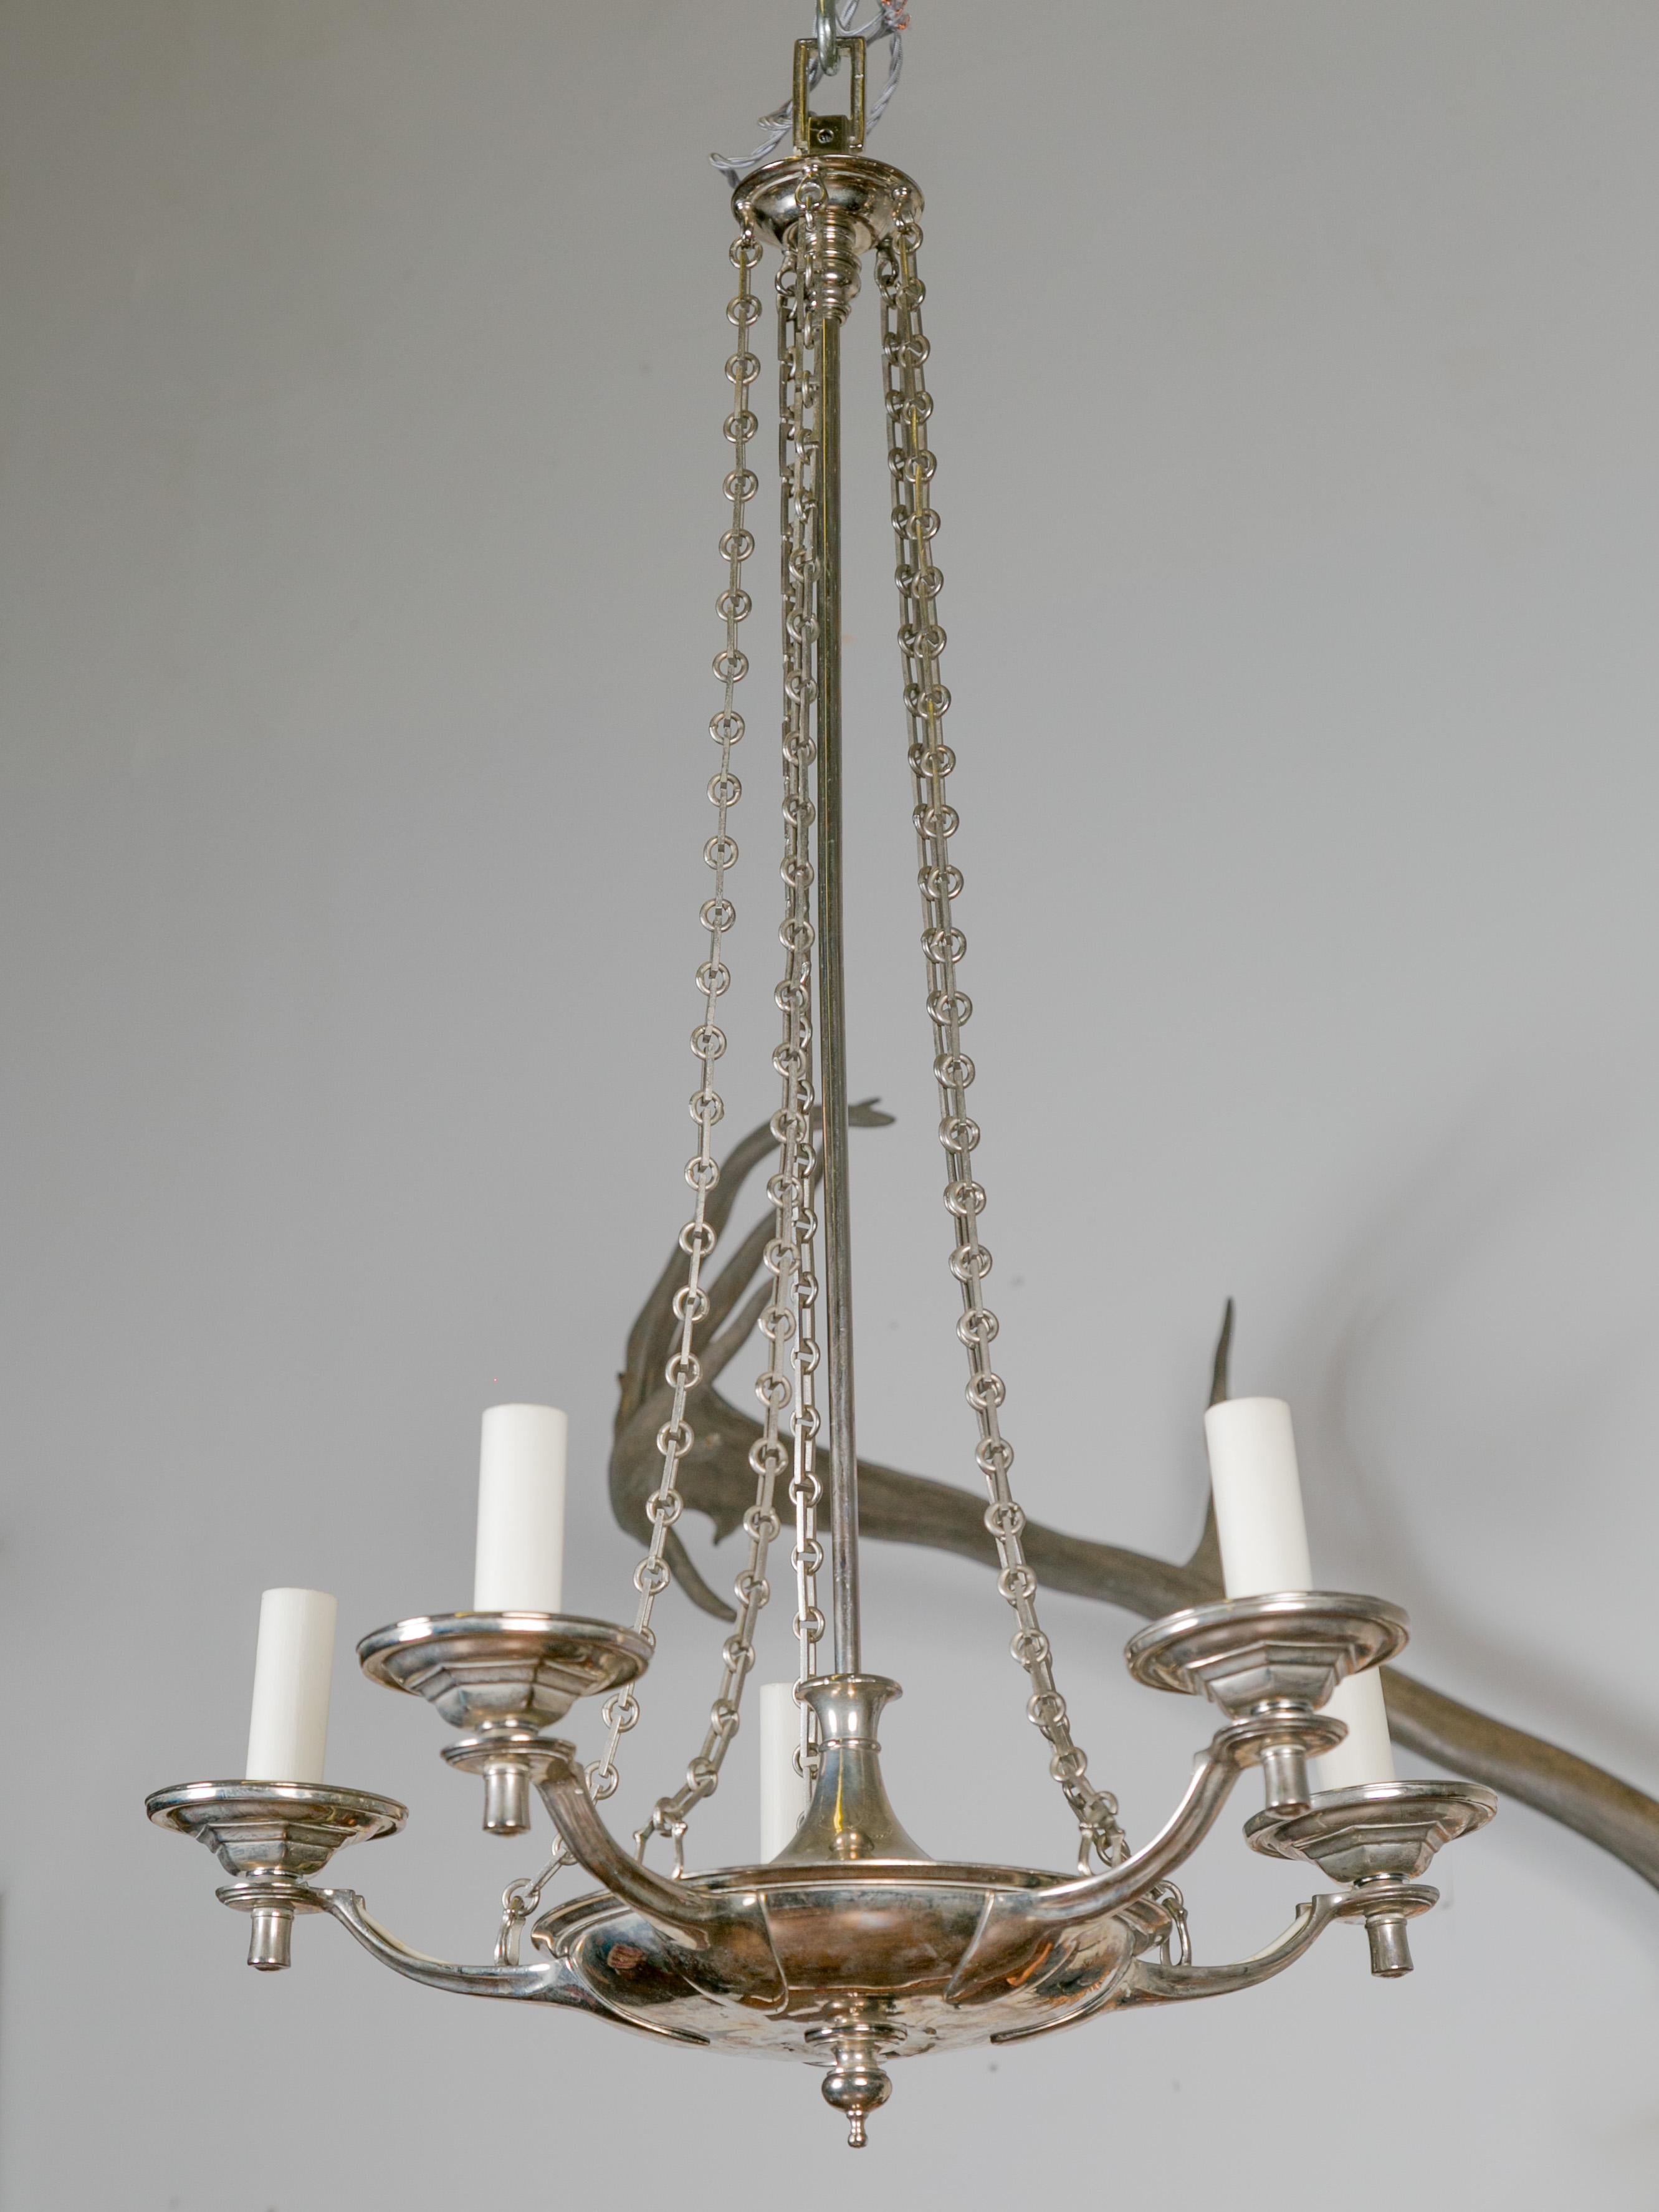 An English vintage five-light nickel chandelier from the late 20th century, with profiled links. Created in England during the third quarter of the 20th century, this nickel chandelier features a central rod with upper canopy from which are hanging